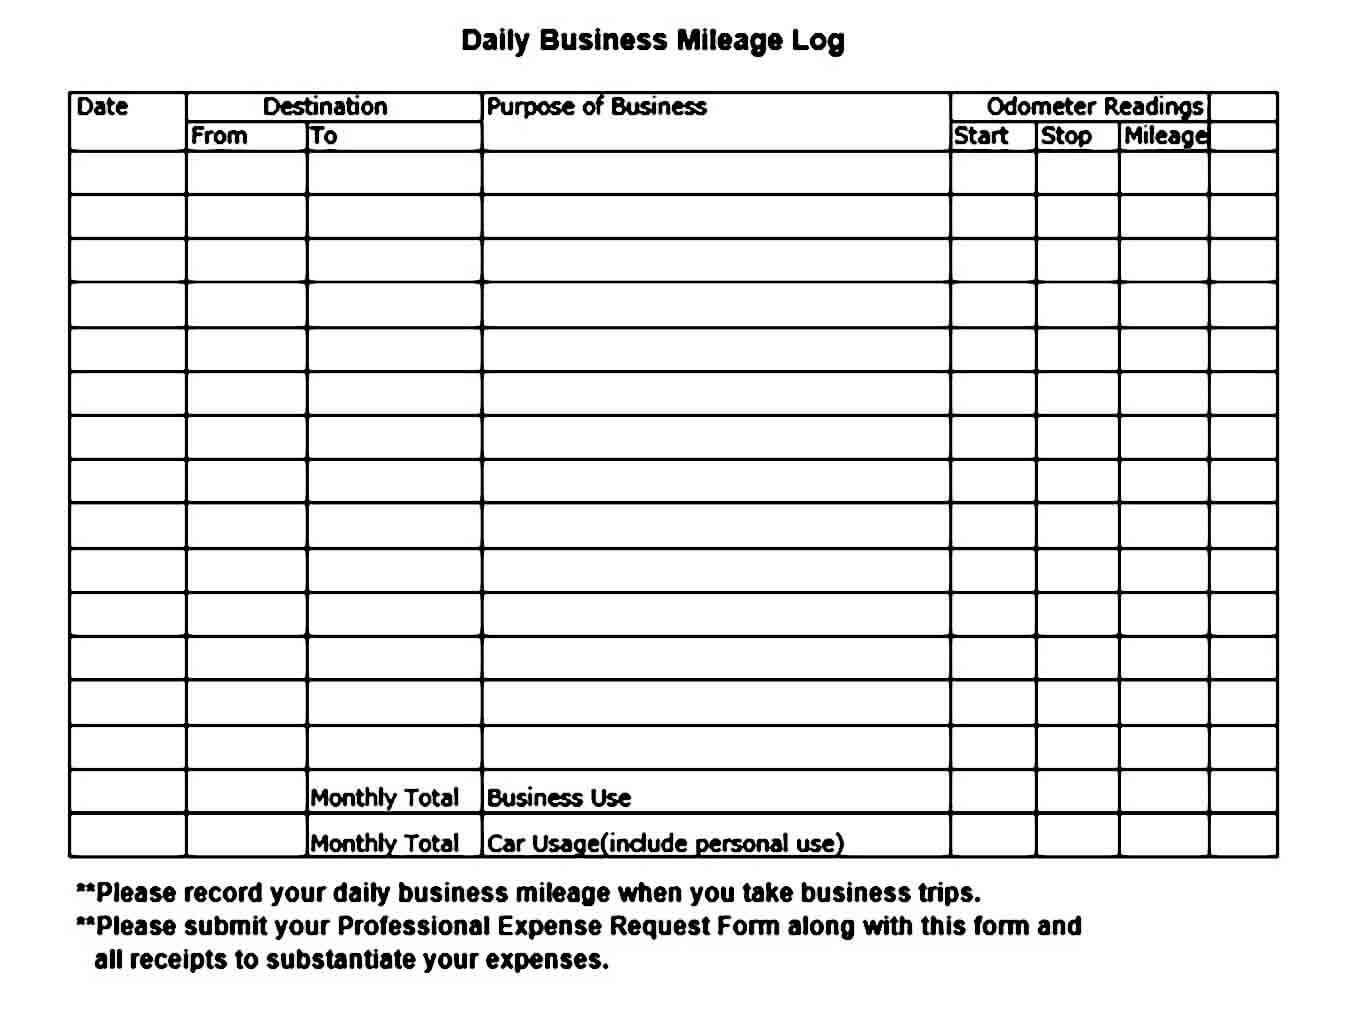 Daily Business Mileage Log